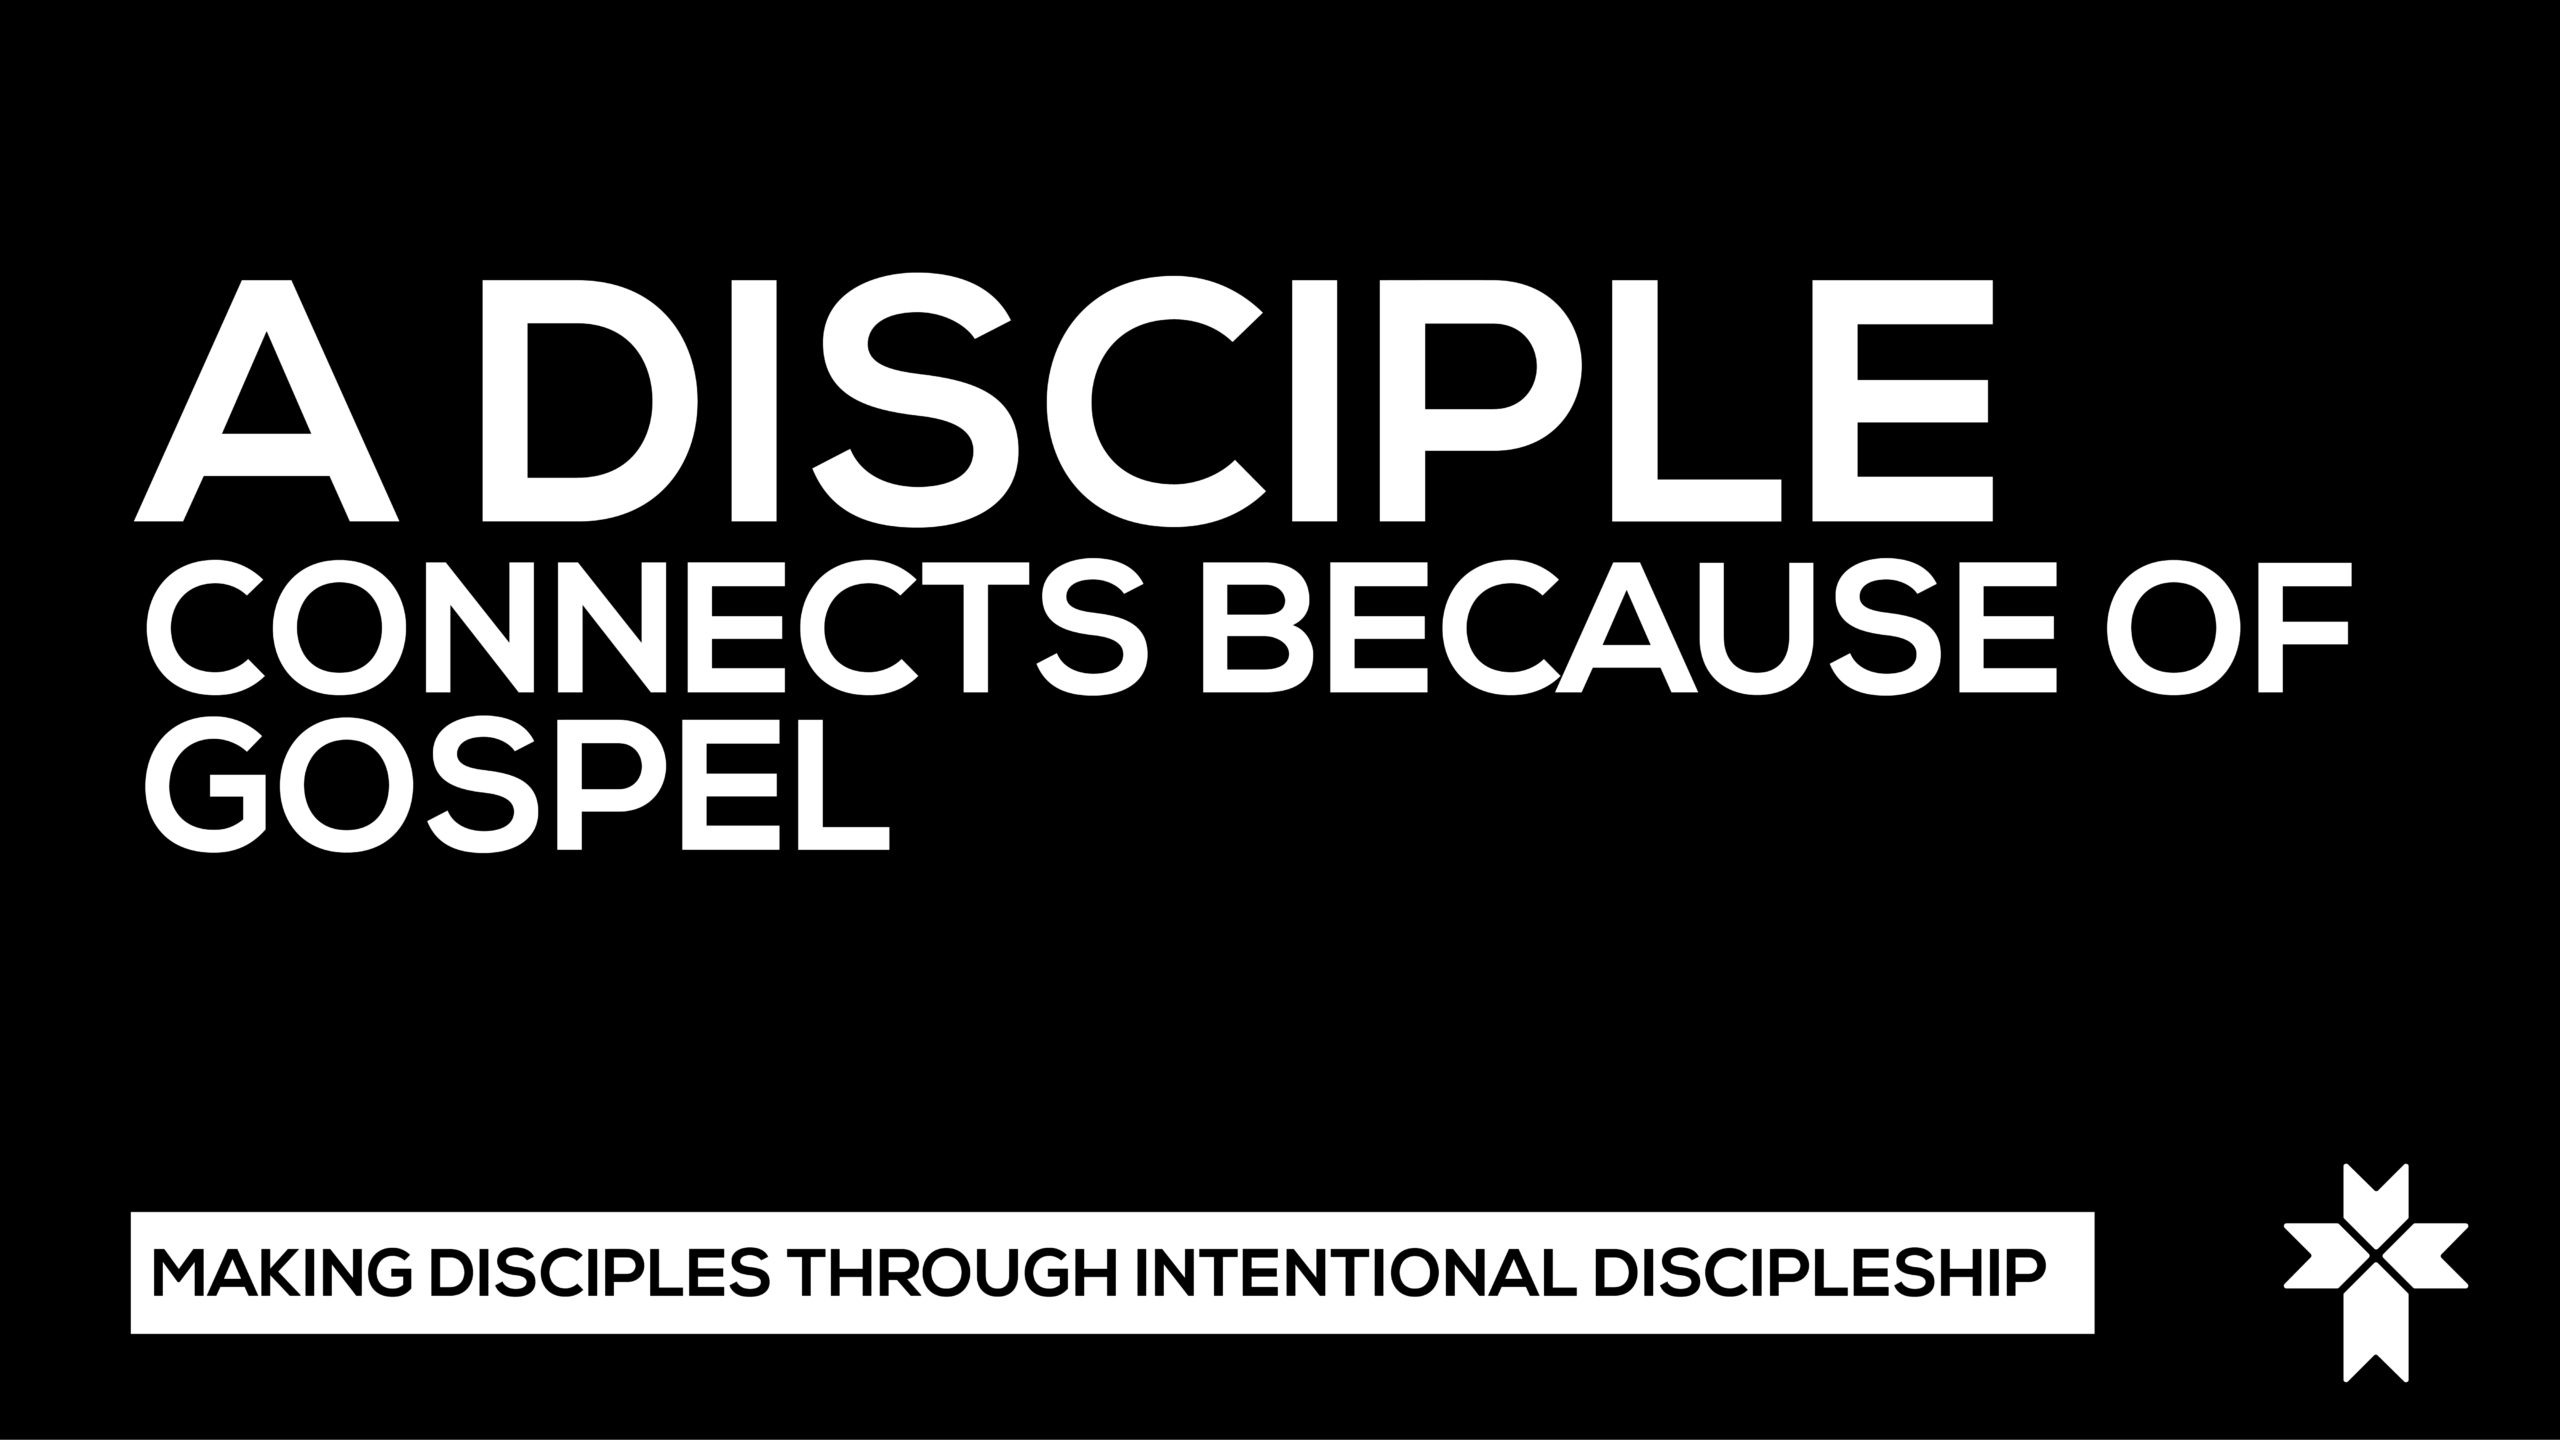 A Disciple Connects because of the Gospel